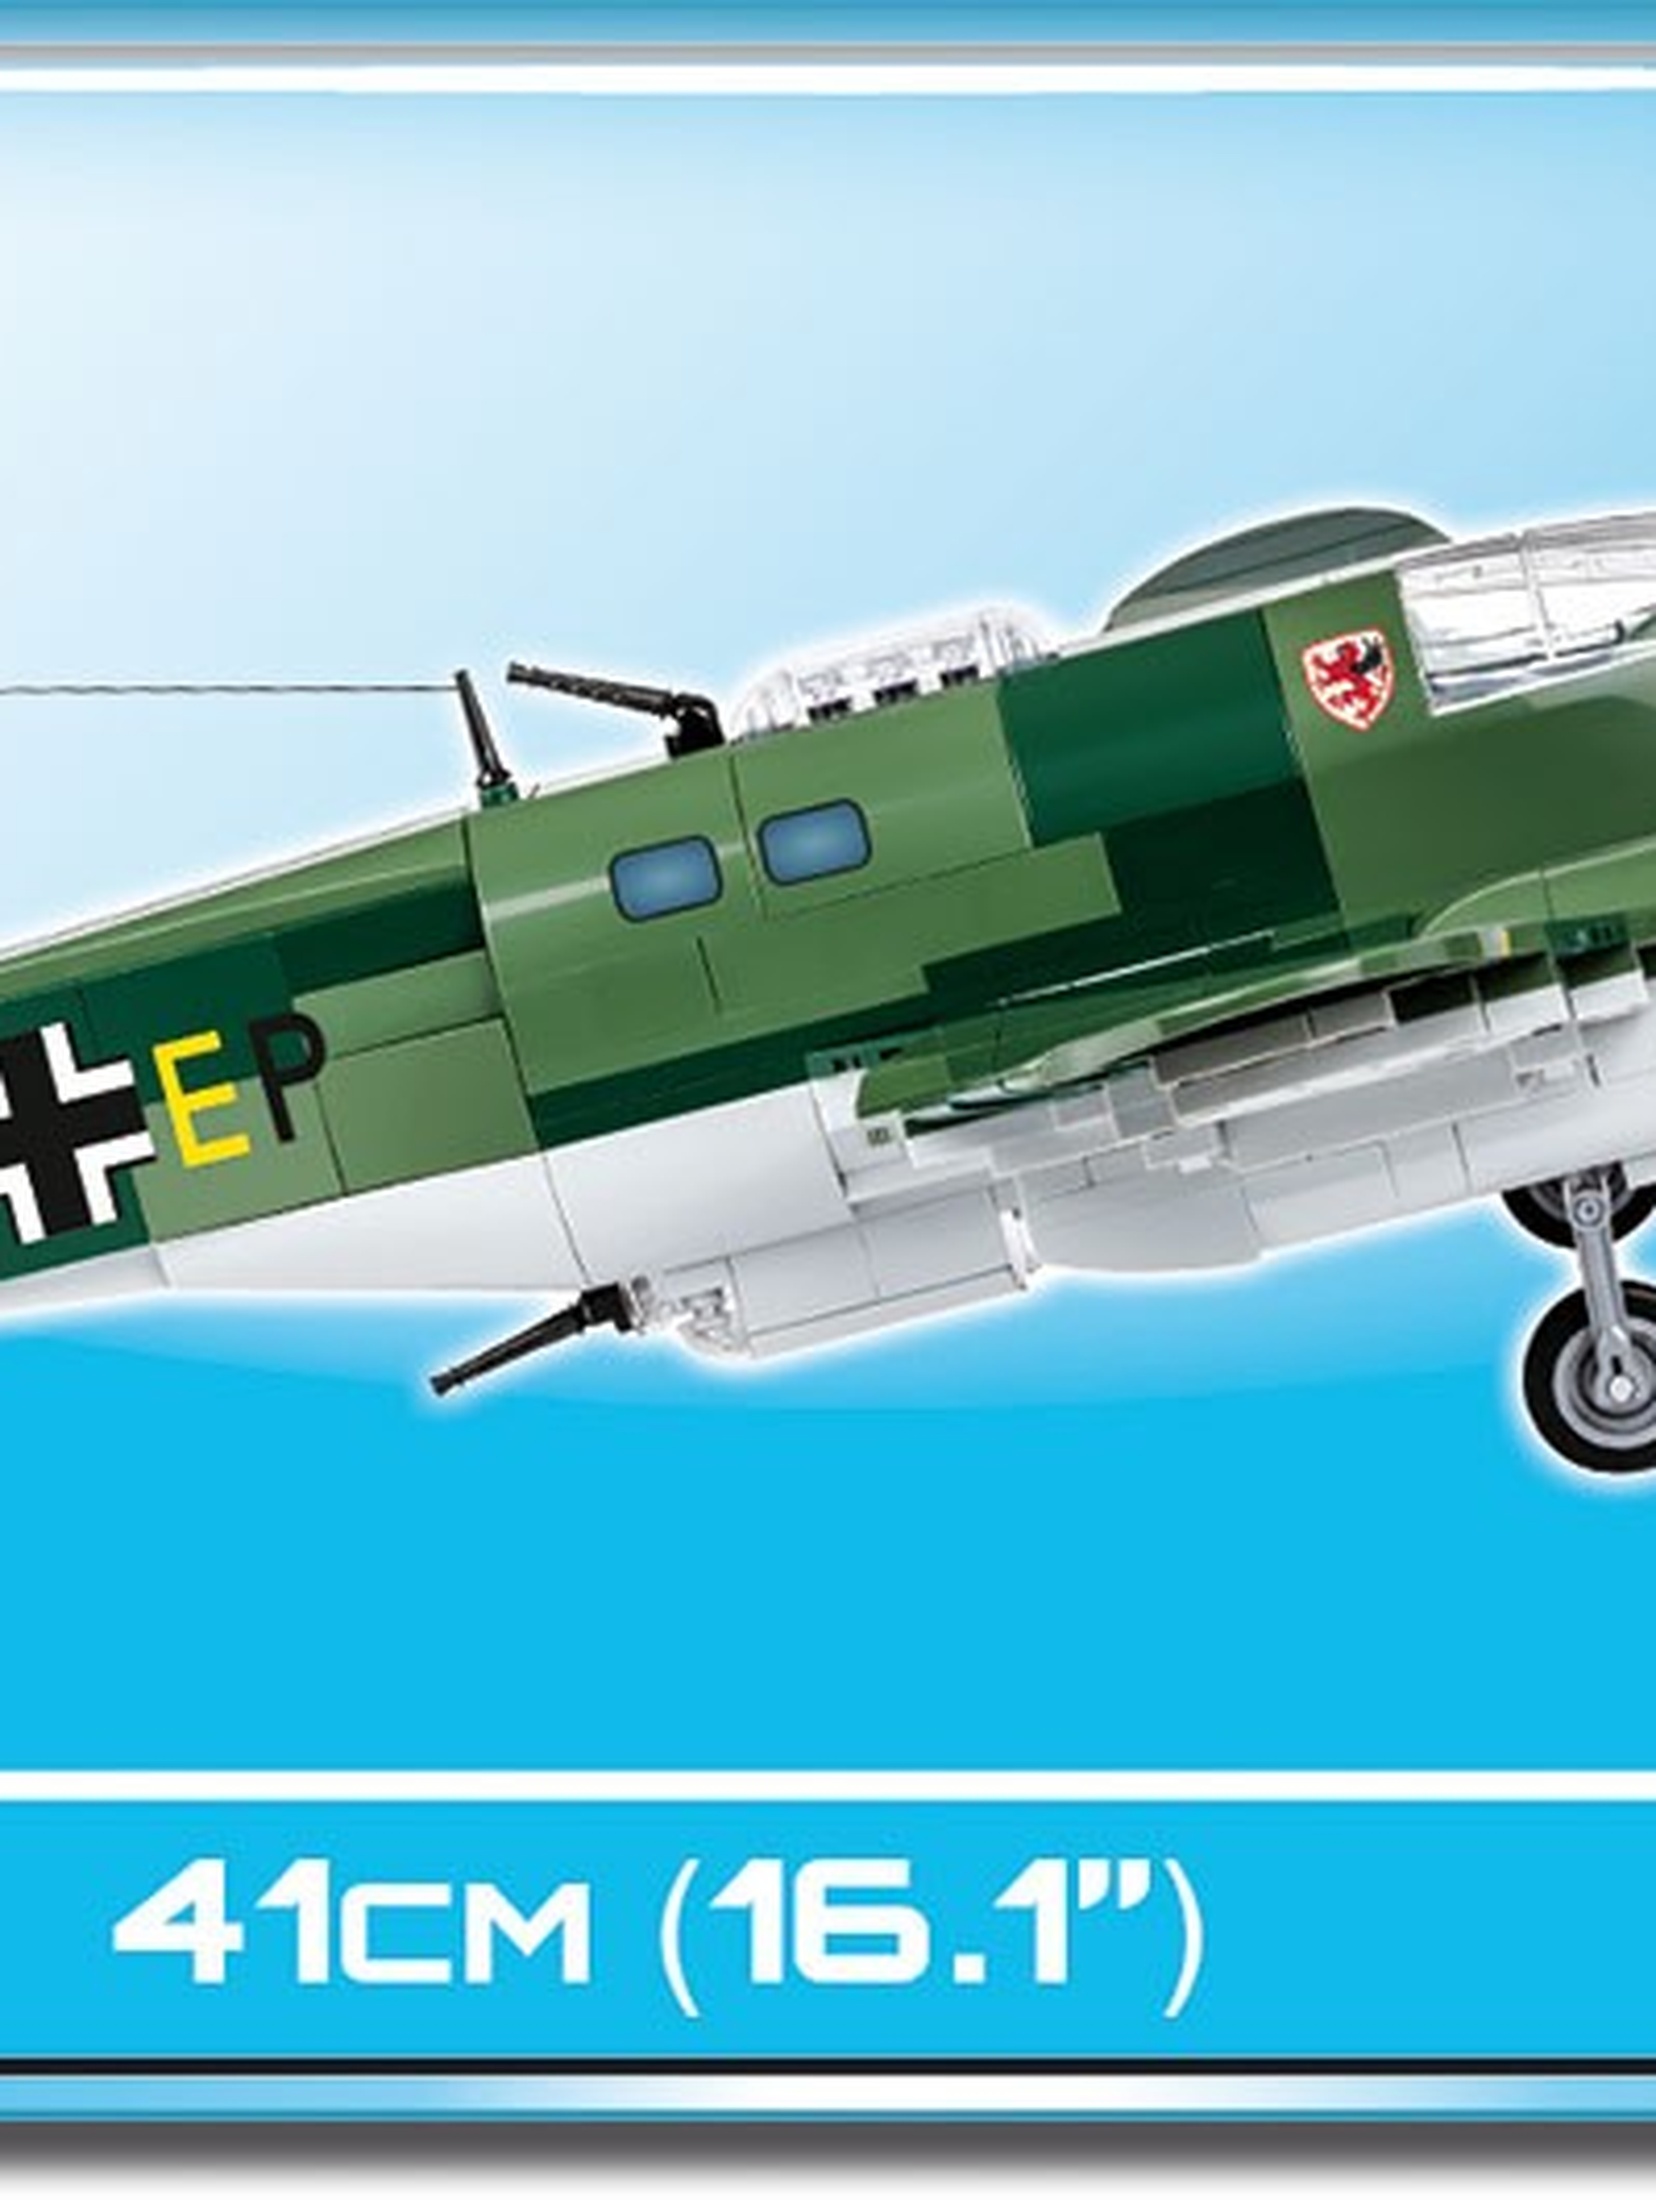 SMALL ARMY Heinkel He 111 P-4 bombowiec